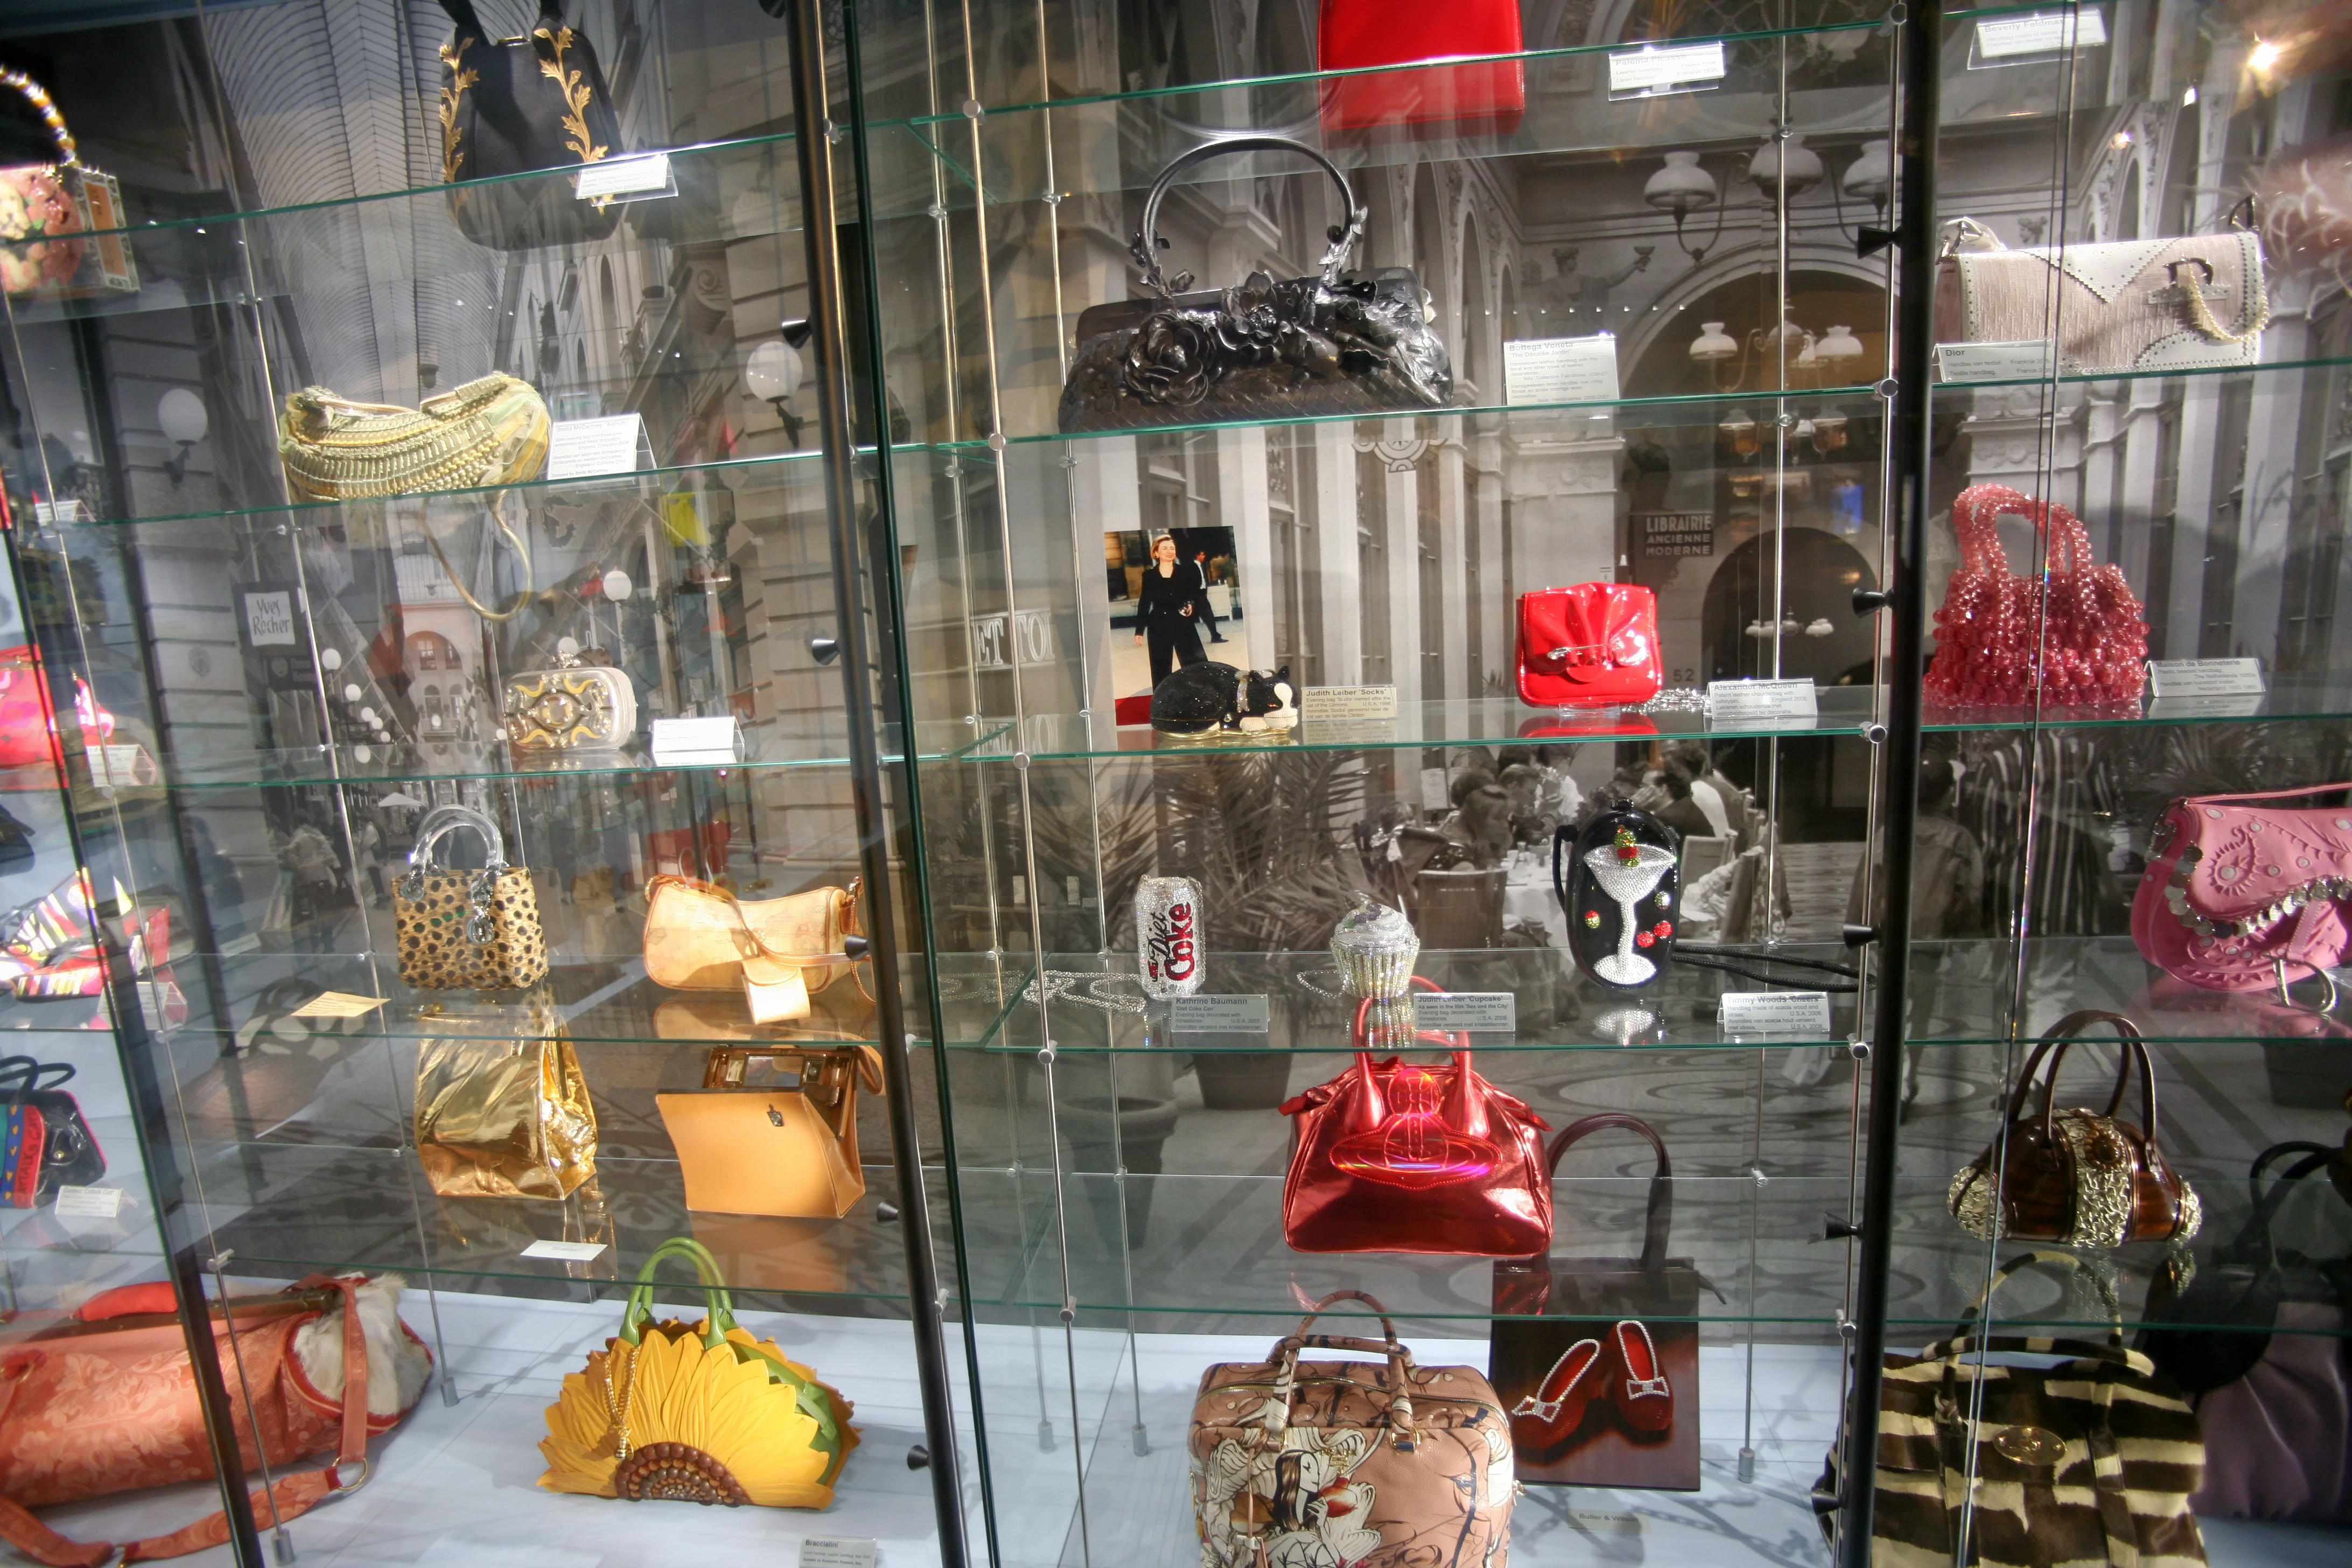 Display of Bags Museum of Bags and Purses Amsterdam | mikestravelguide.com